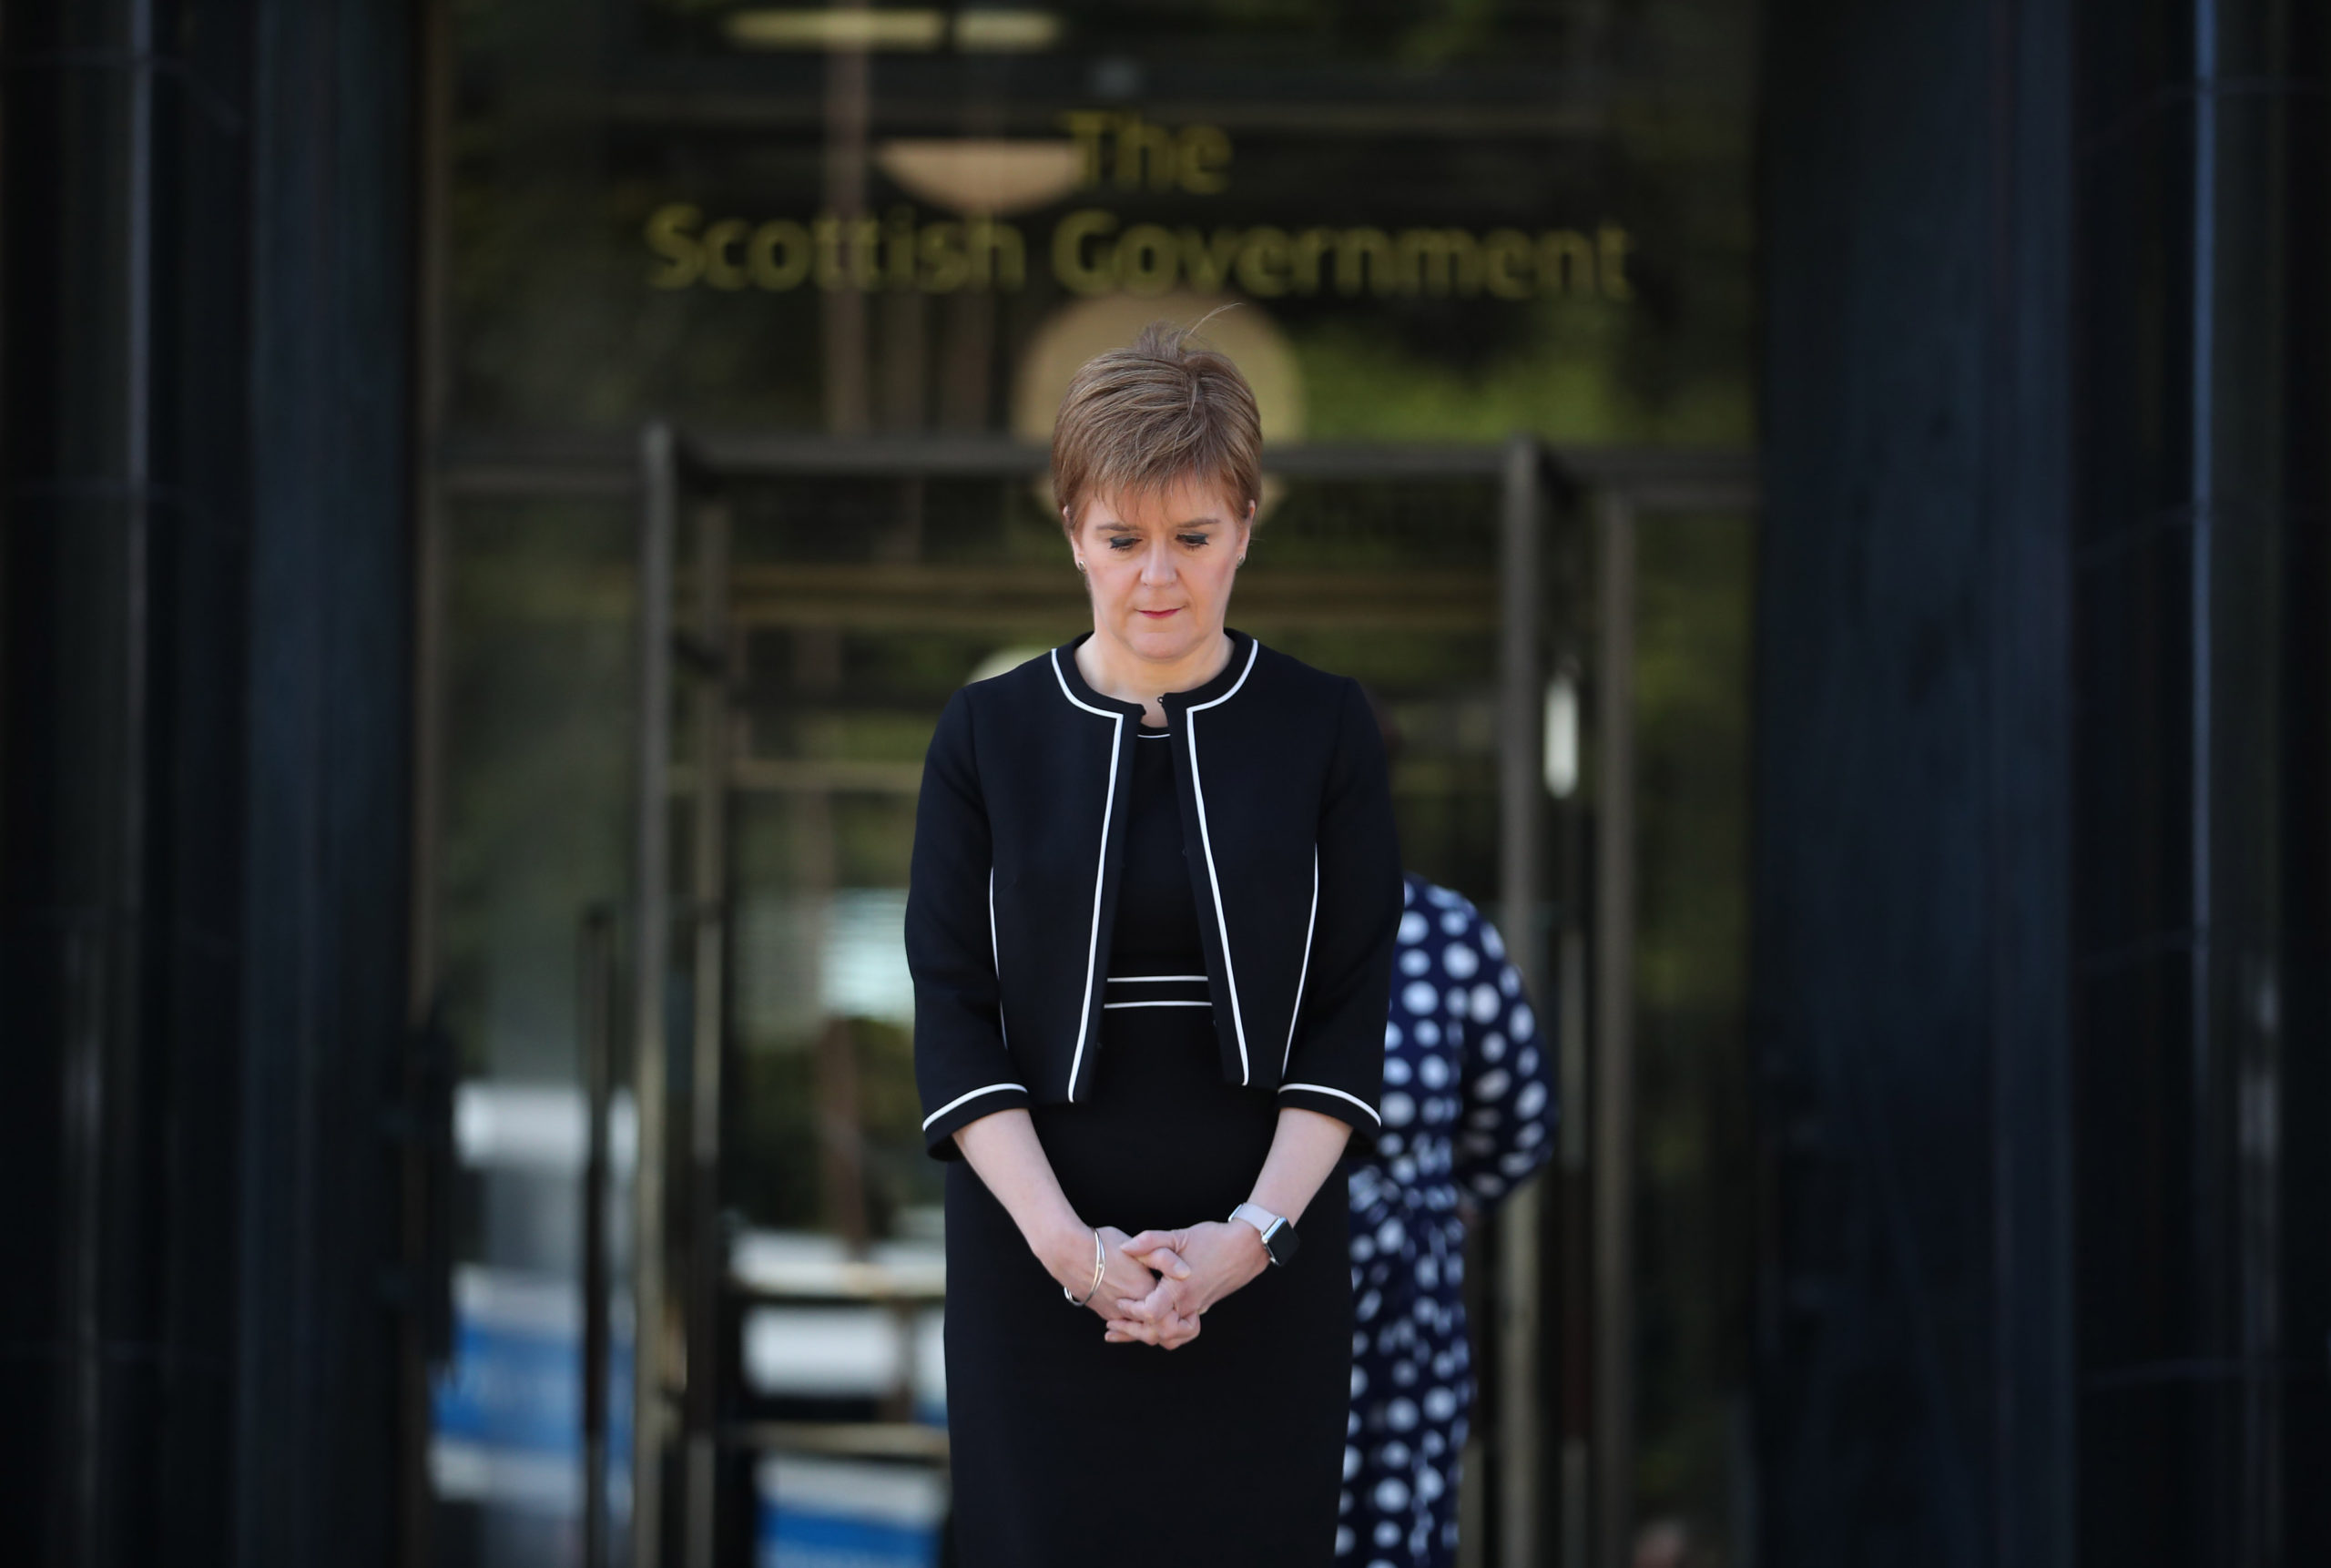 First Minister Nicola Sturgeon stands outside St Andrew's House in Edinburgh to observe a minute's silence in tribute to the NHS staff and key workers who have died during the coronavirus outbreak.